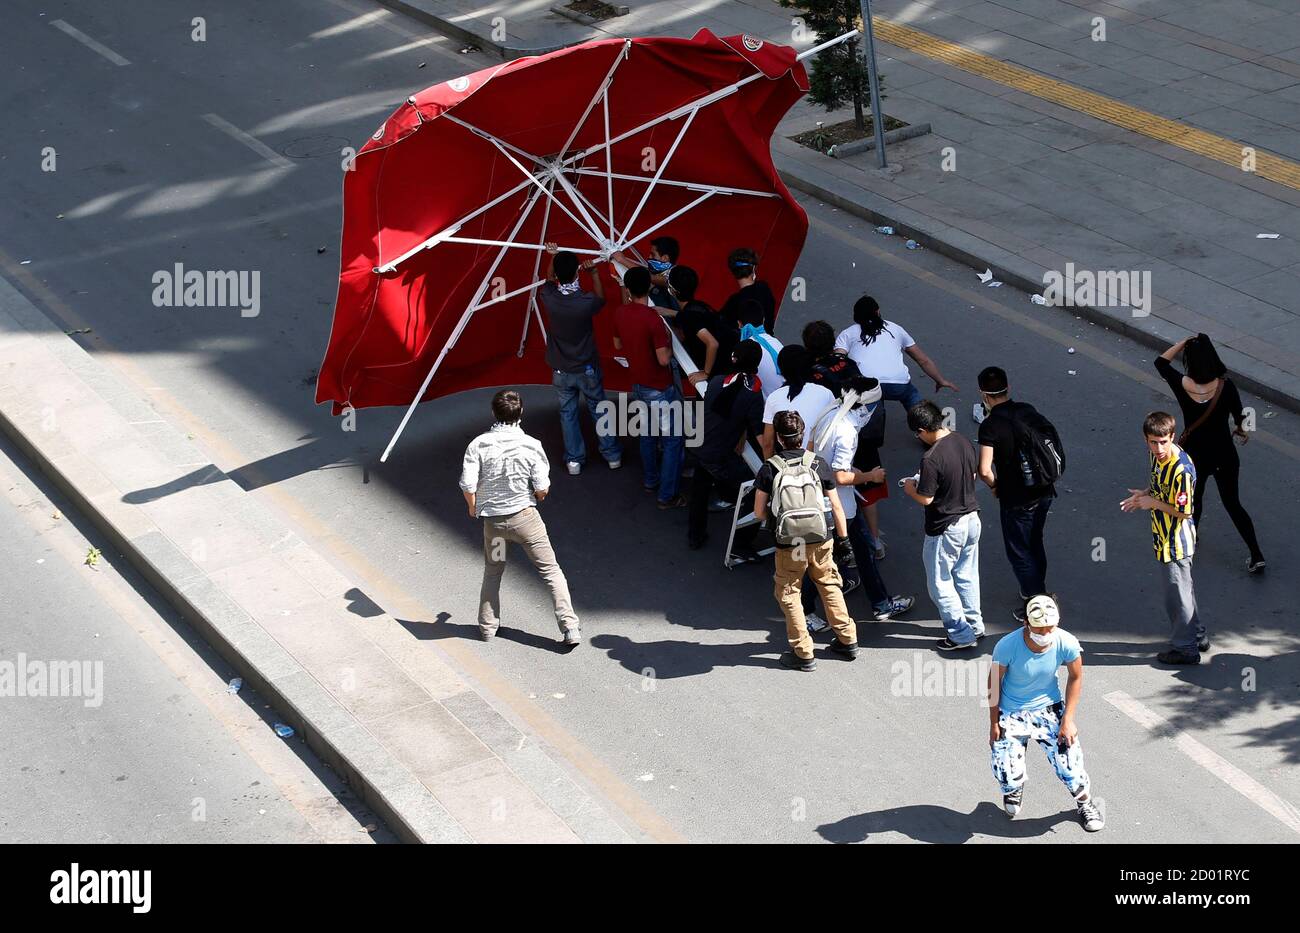 Protesters use a huge umbrella as a shield as they clash with riot police in Ankara June 3, 2013. Turkish Prime Minister Tayyip Erdogan accused anti-government protesters on Monday of walking 'arm-in-arm with terrorism', remarks that could further inflame public anger after three days of some of the most violent riots in decades. Hundreds of police and protesters have been injured since Friday in the riots, which began with a demonstration to halt construction in a park in an Istanbul square and grew into mass protests against what opponents call Erdogan's authoritarianism. REUTERS/Umit Bektas Stock Photo